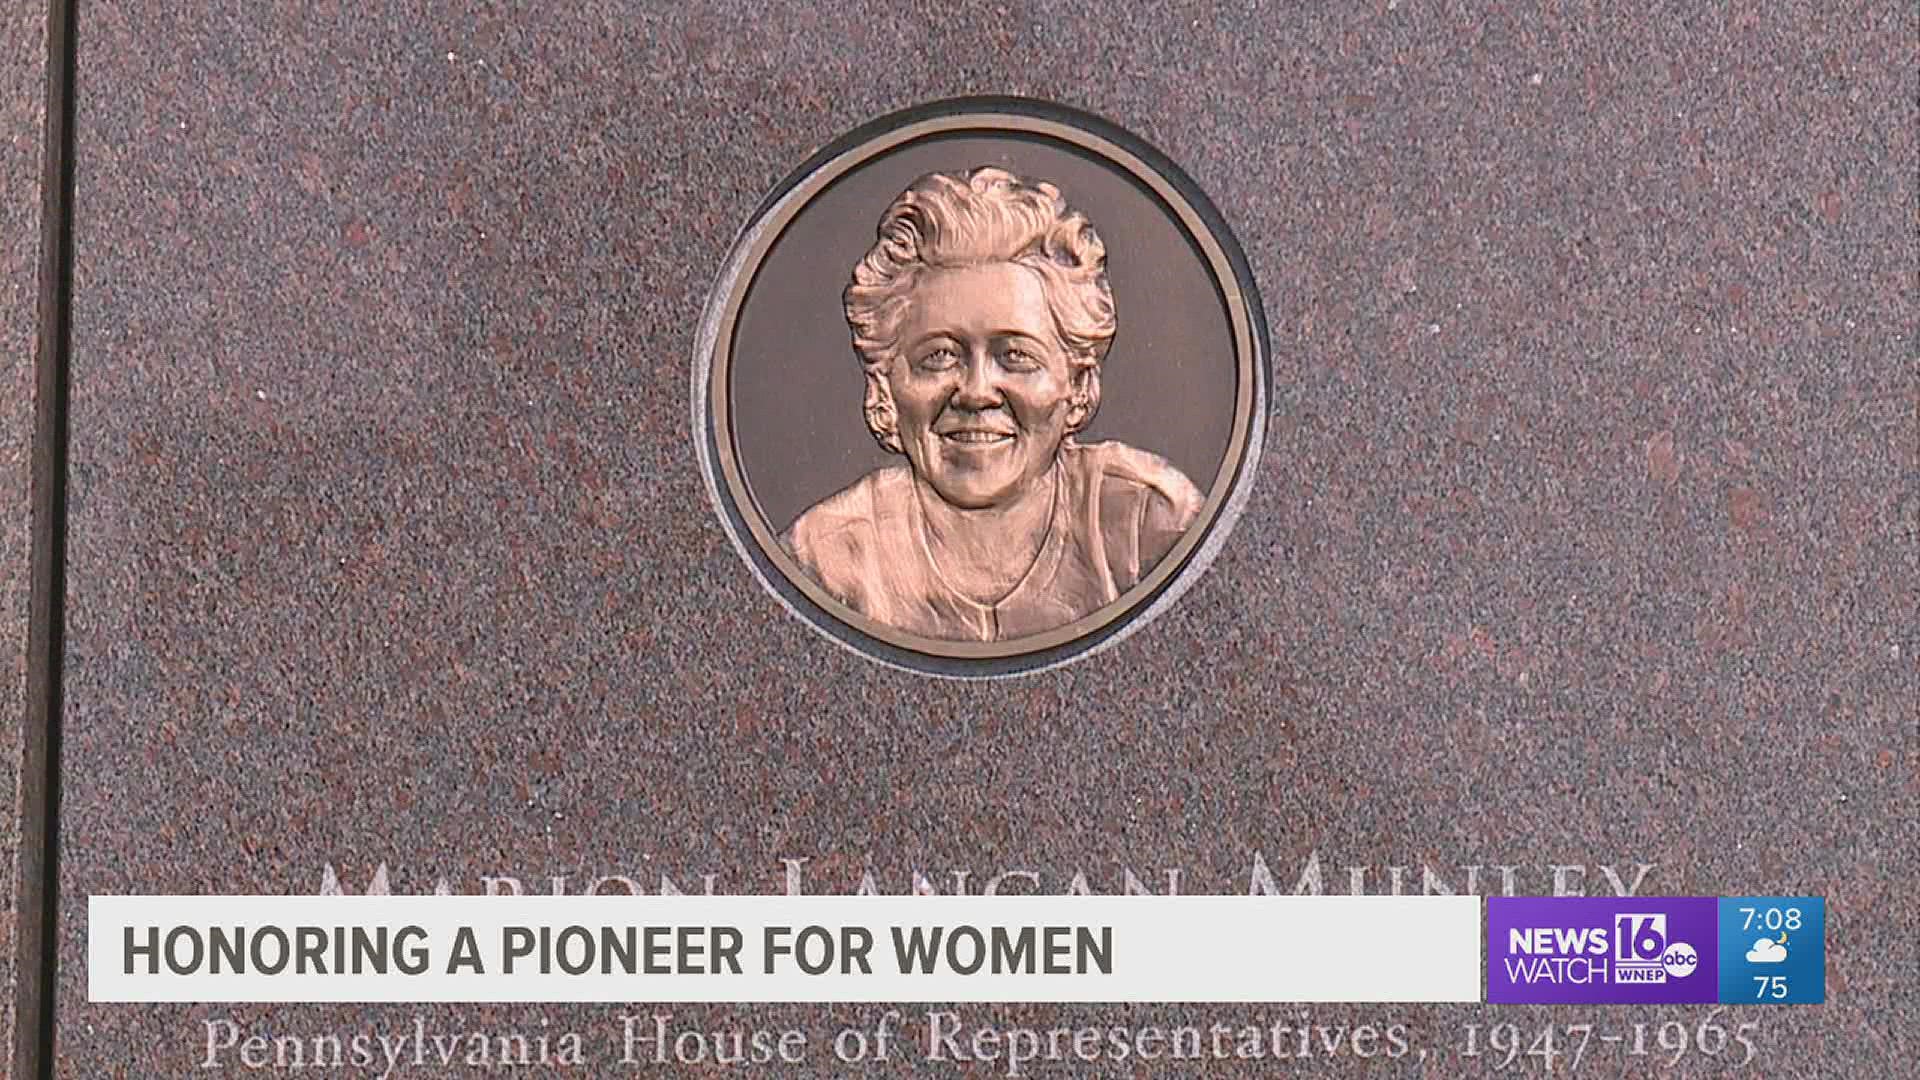 Marion Munley, one of the first women to be elected to the PA House of Representatives, is the first woman to be included in this monument.